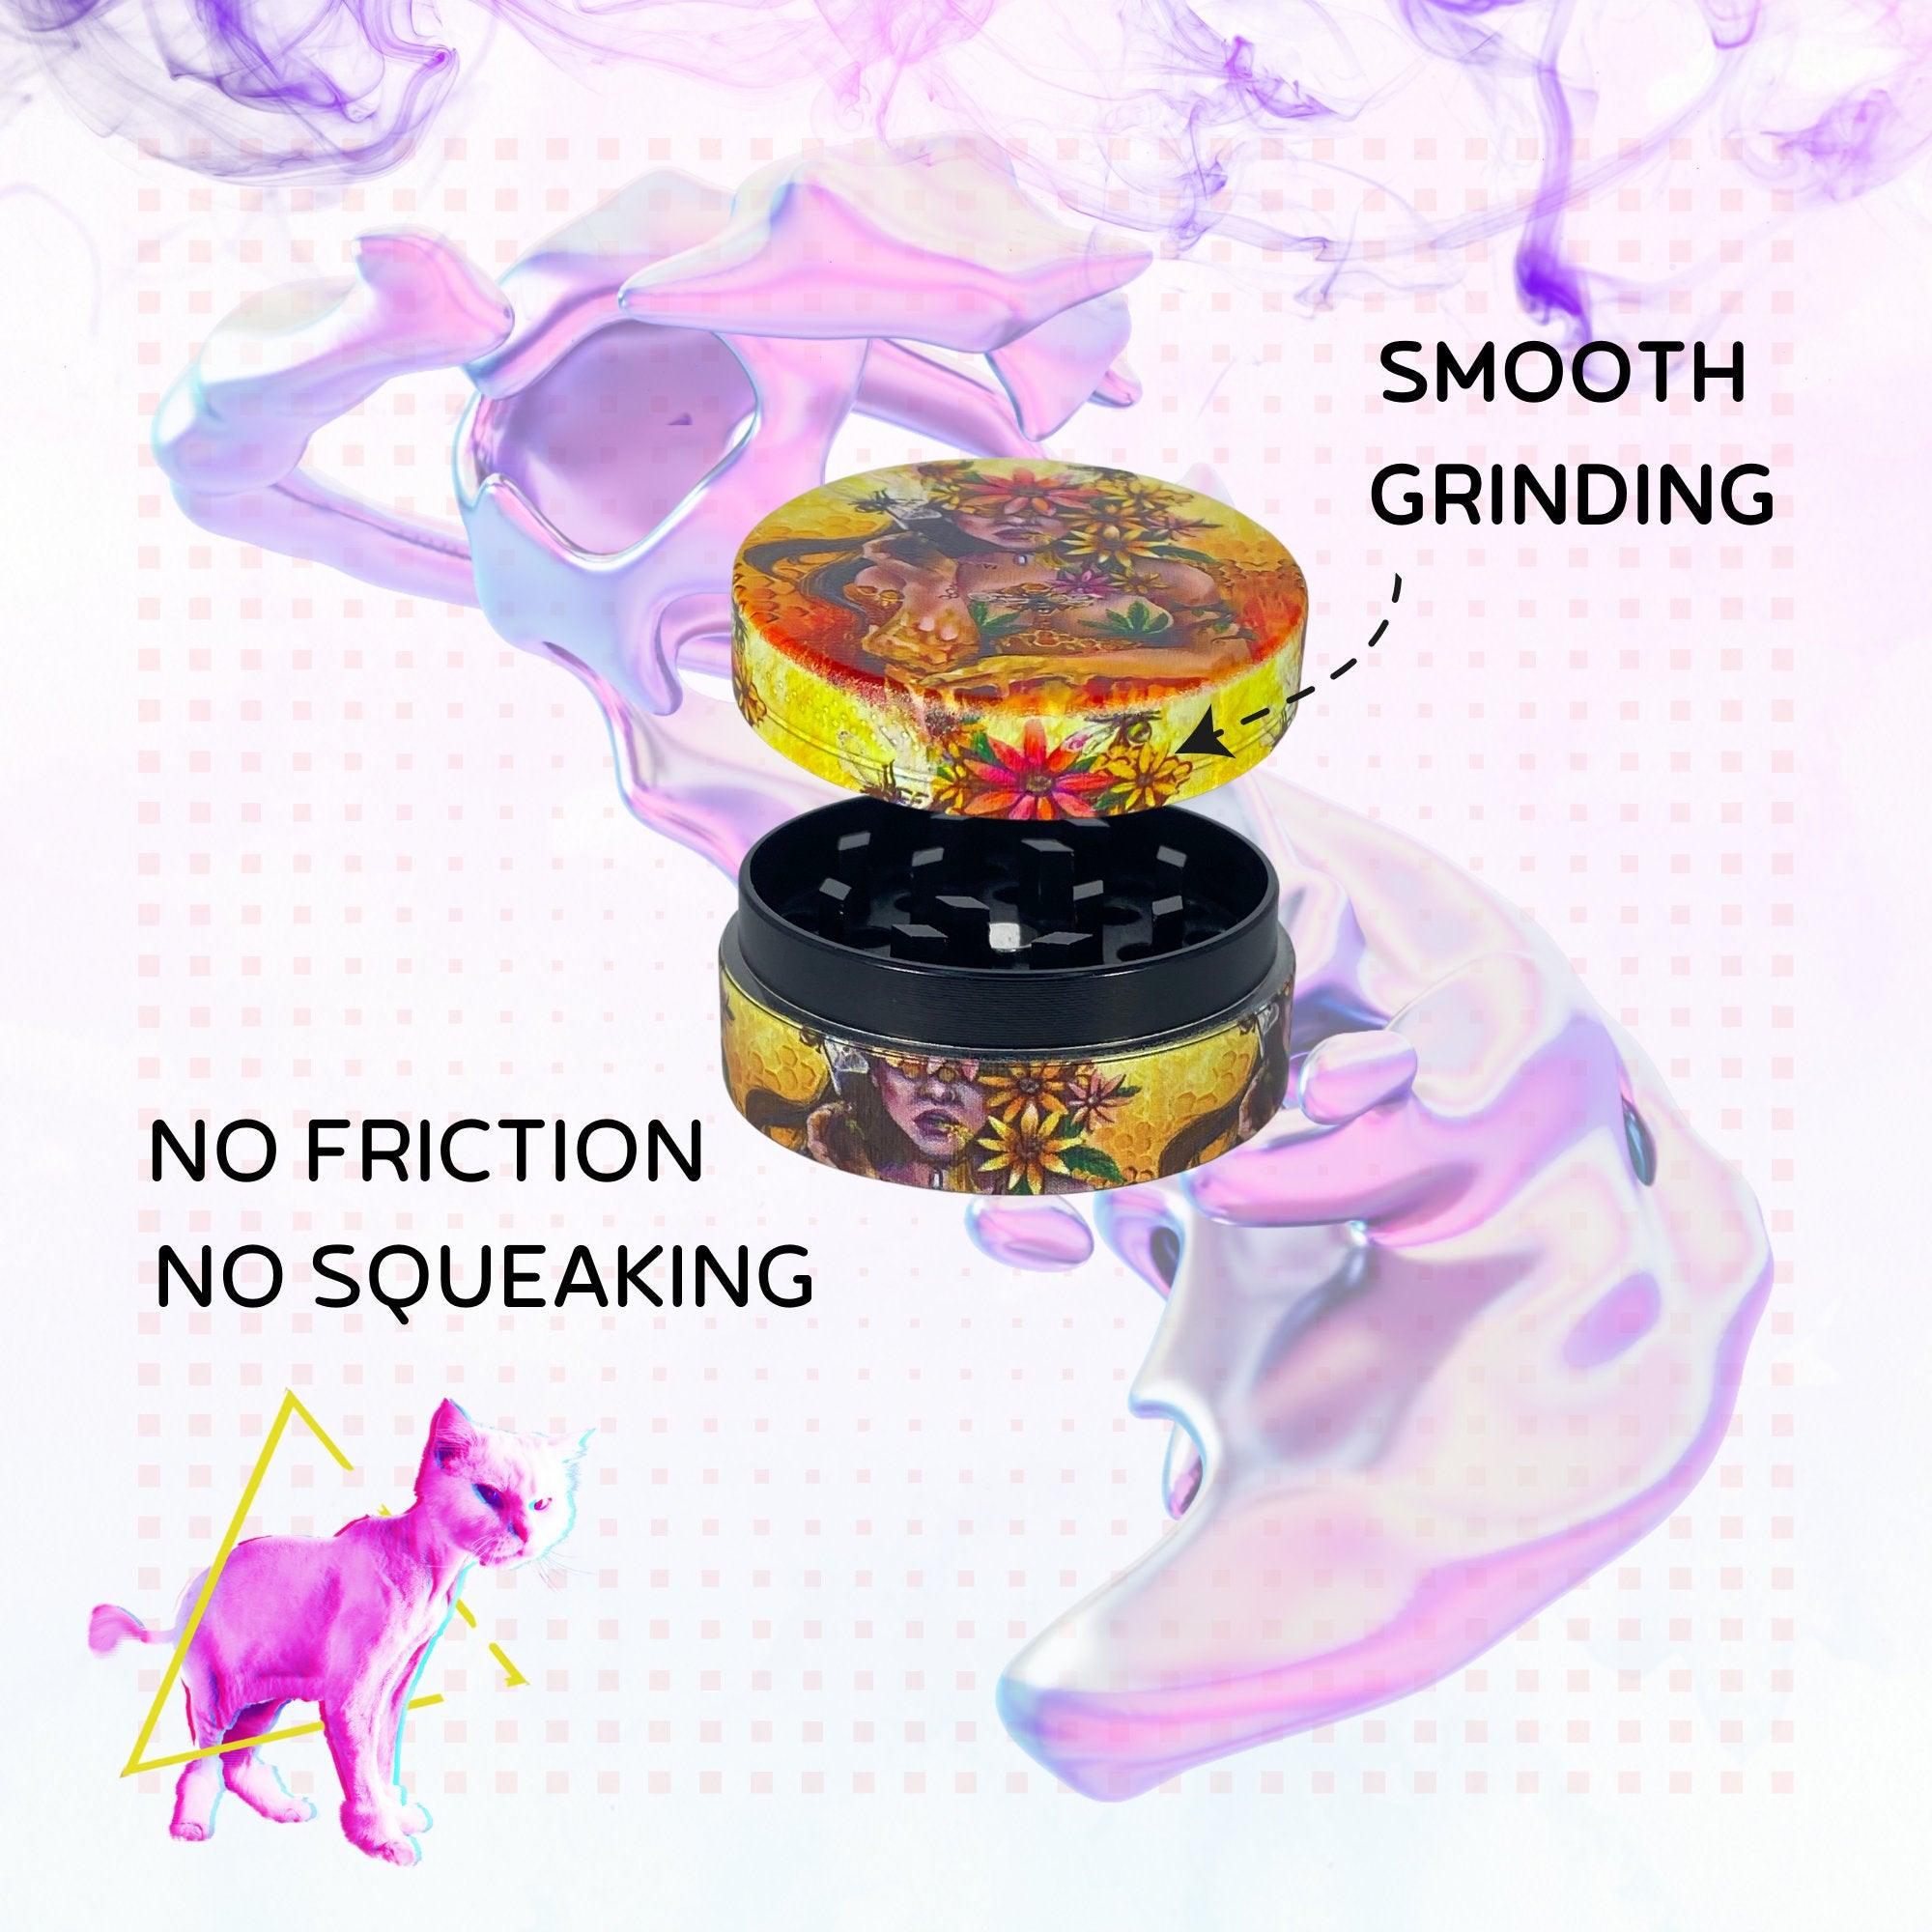 Weed Grinder | African Cool Funny, Men marijuana, cannabis grinders, accessories, 4 piece, cannabis, Pink Psychedelic Trippy Herb Girly bong